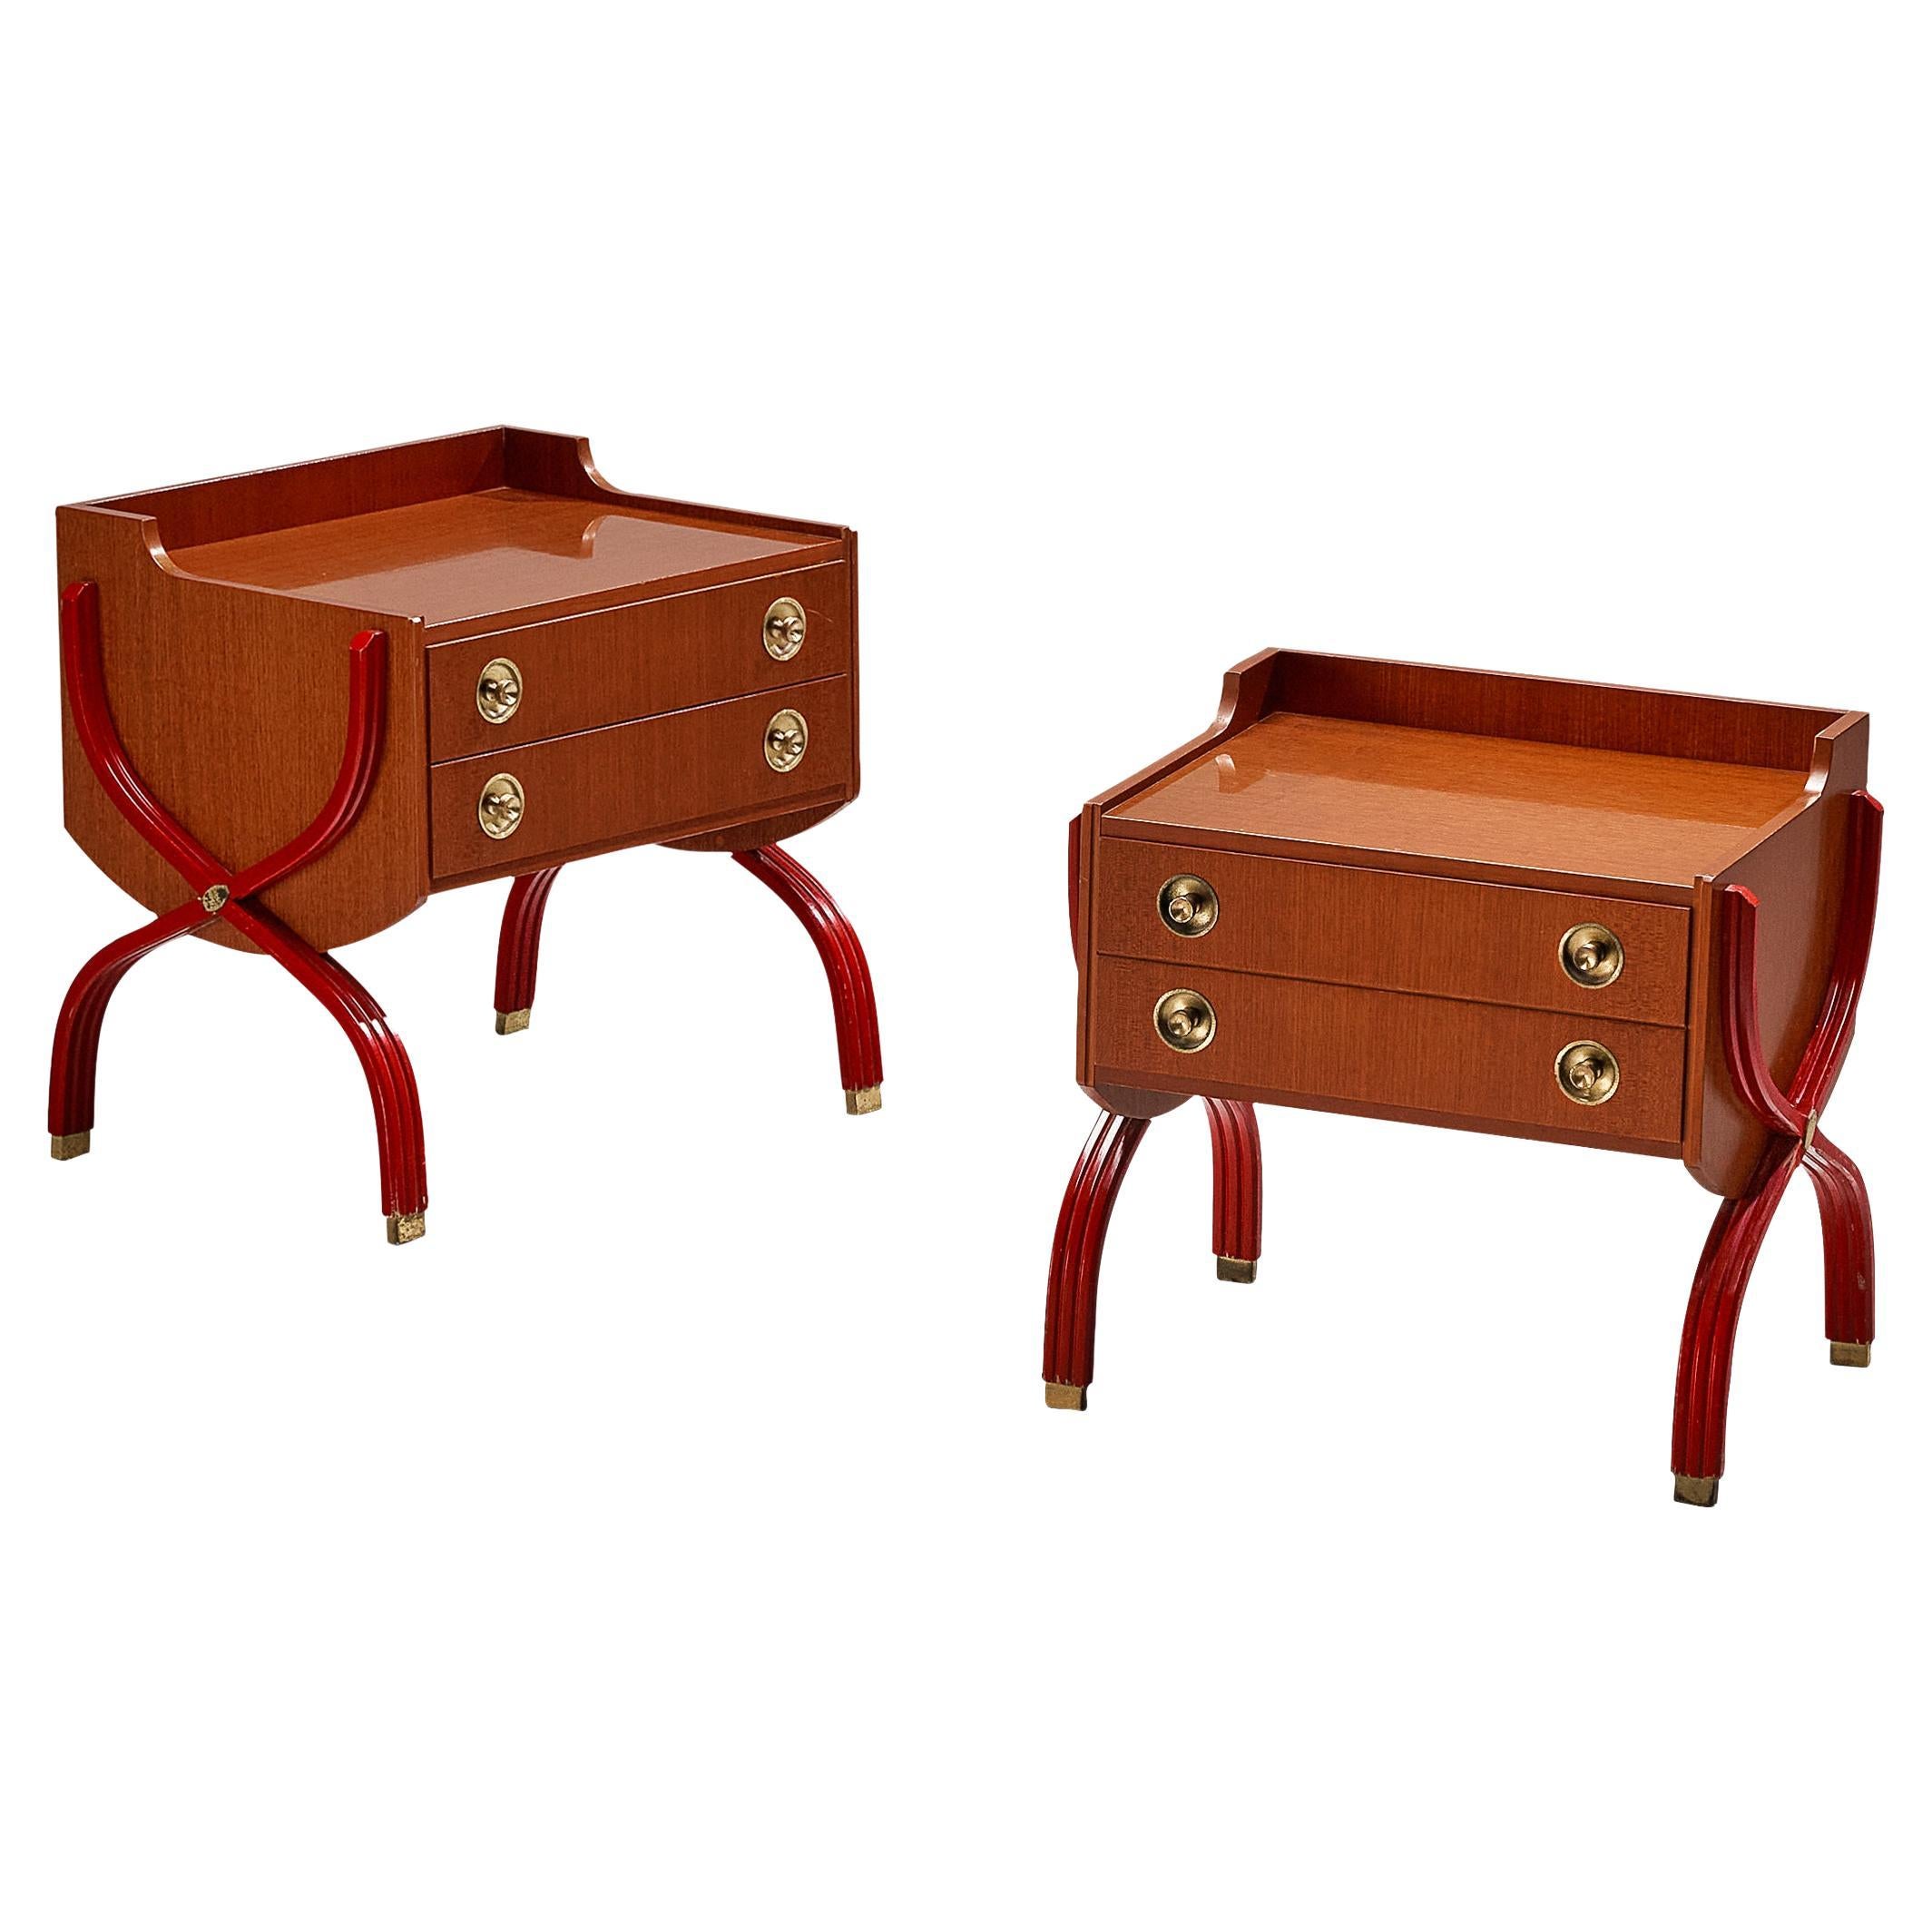  Tosi Arredamenti Pair of Cabinets or Night Stands in Mahogany and Brass  For Sale